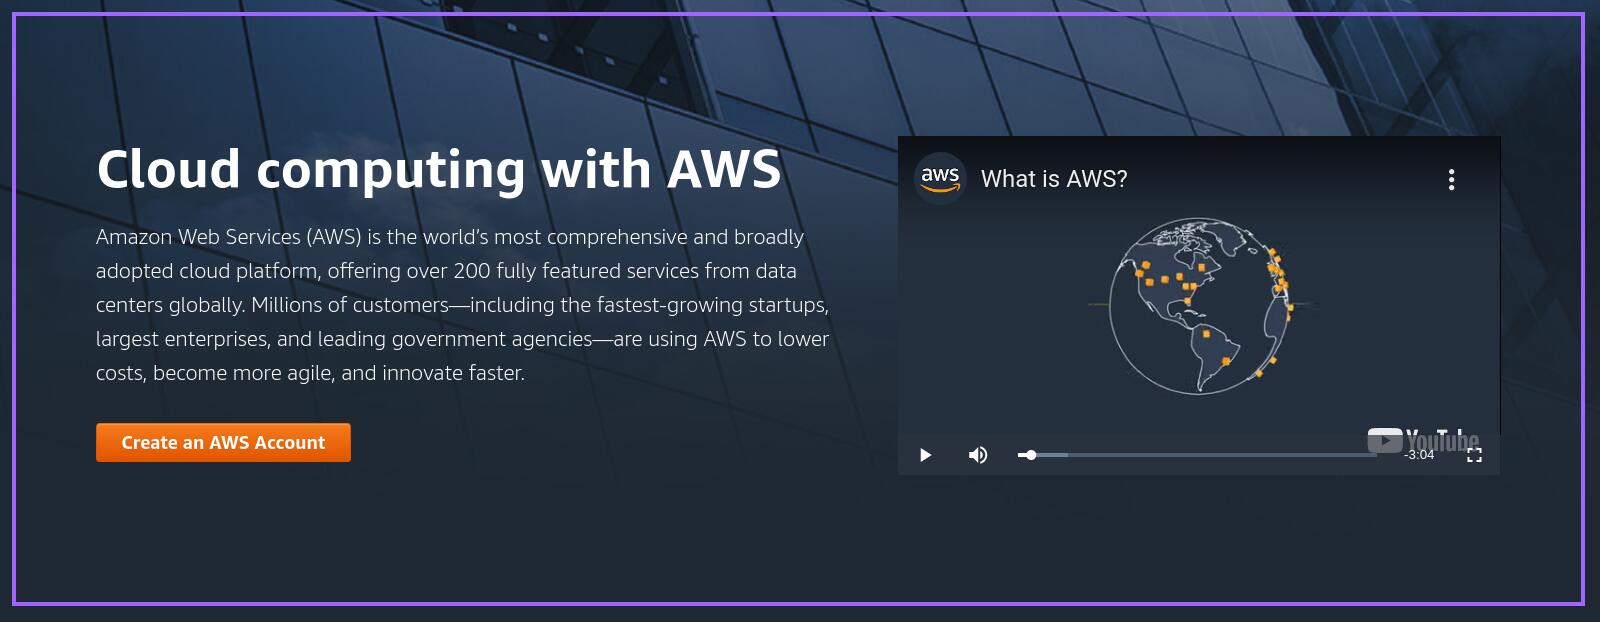 aws about graphic